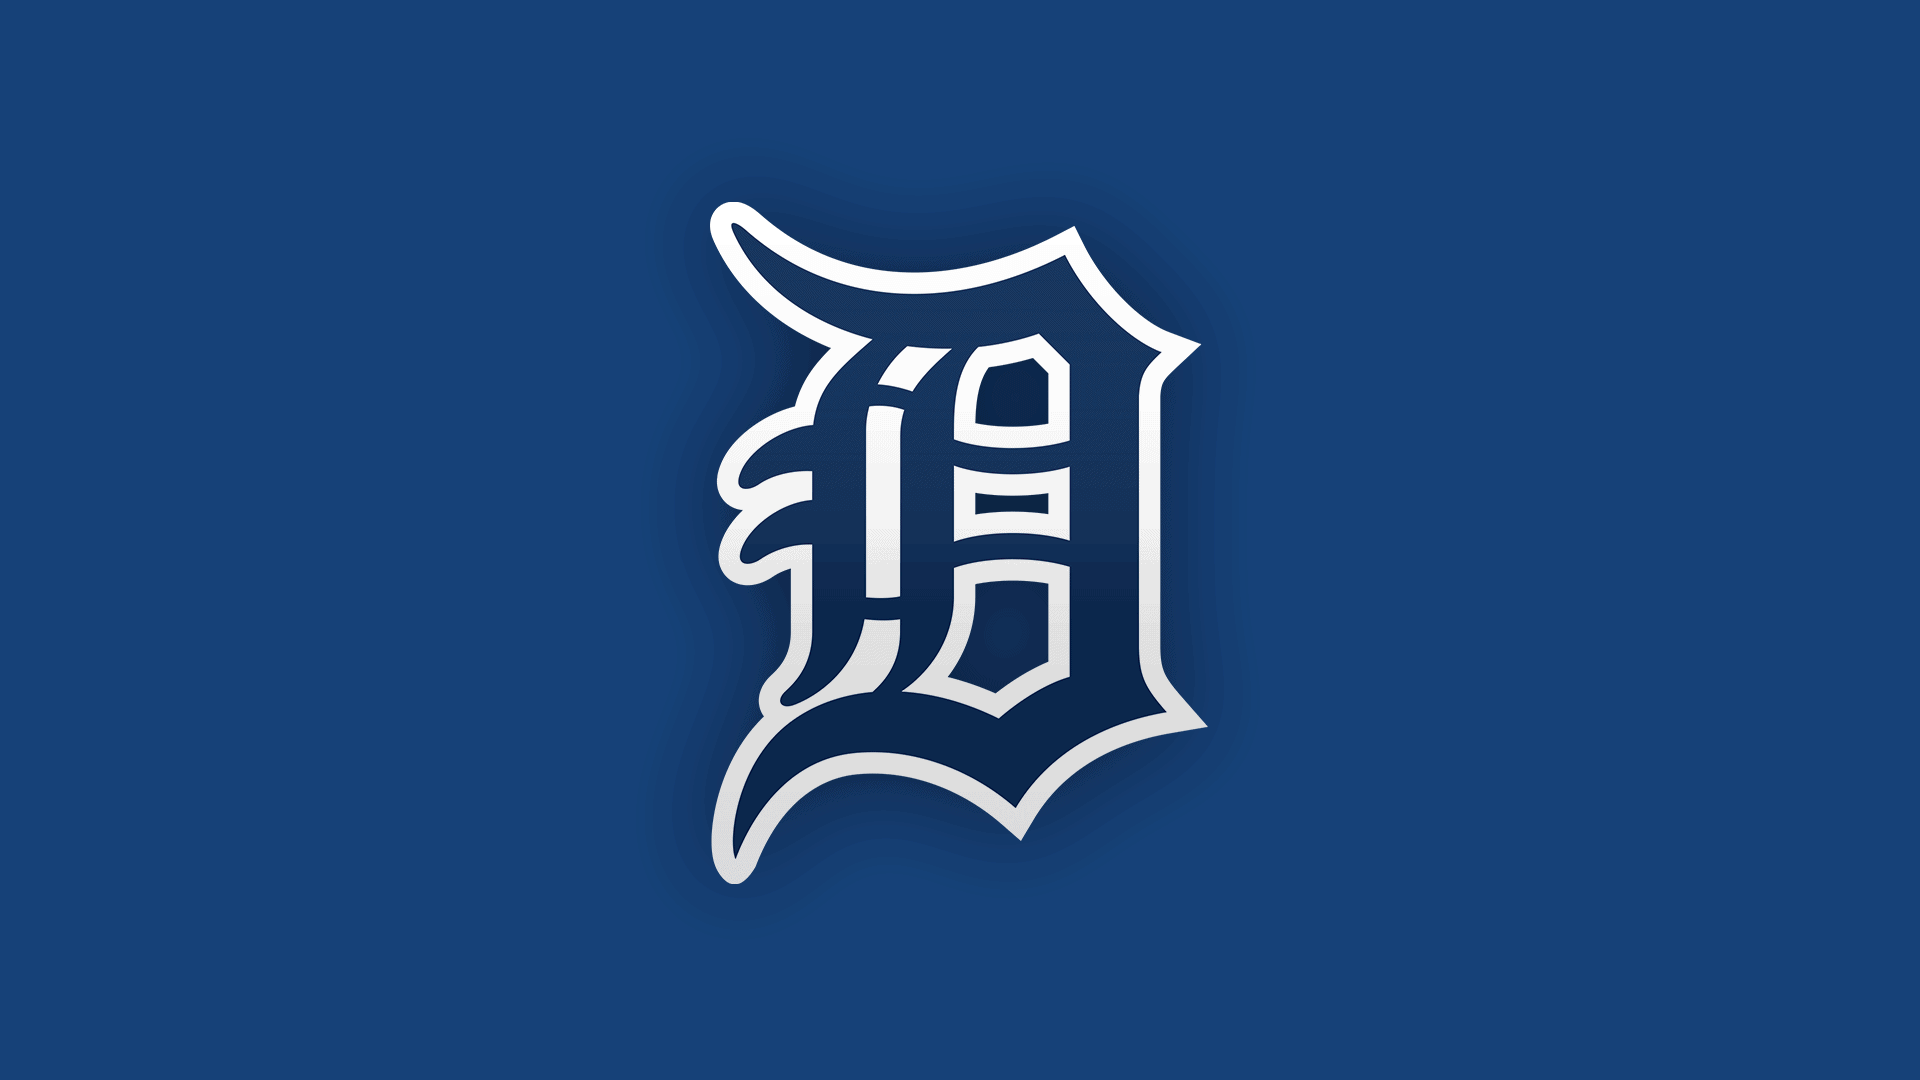 Detroit Tigers Odds Beer Girl Joey Wentz Tyler Holton Luis Santana Tim Naughton Rich Hill Joe Rizzo Miami Marlins Blair Calvo Detroit Tigers Top Prospects Tyler Nevin Riley Greene Spencer Torkelson Isan Diaz Detroit Tigers to call up Sawyer Gibson-Long 2024 Detroit Tigers Opening Day Lineup Detroit Tigers hire former World Series Champion Joey Cora